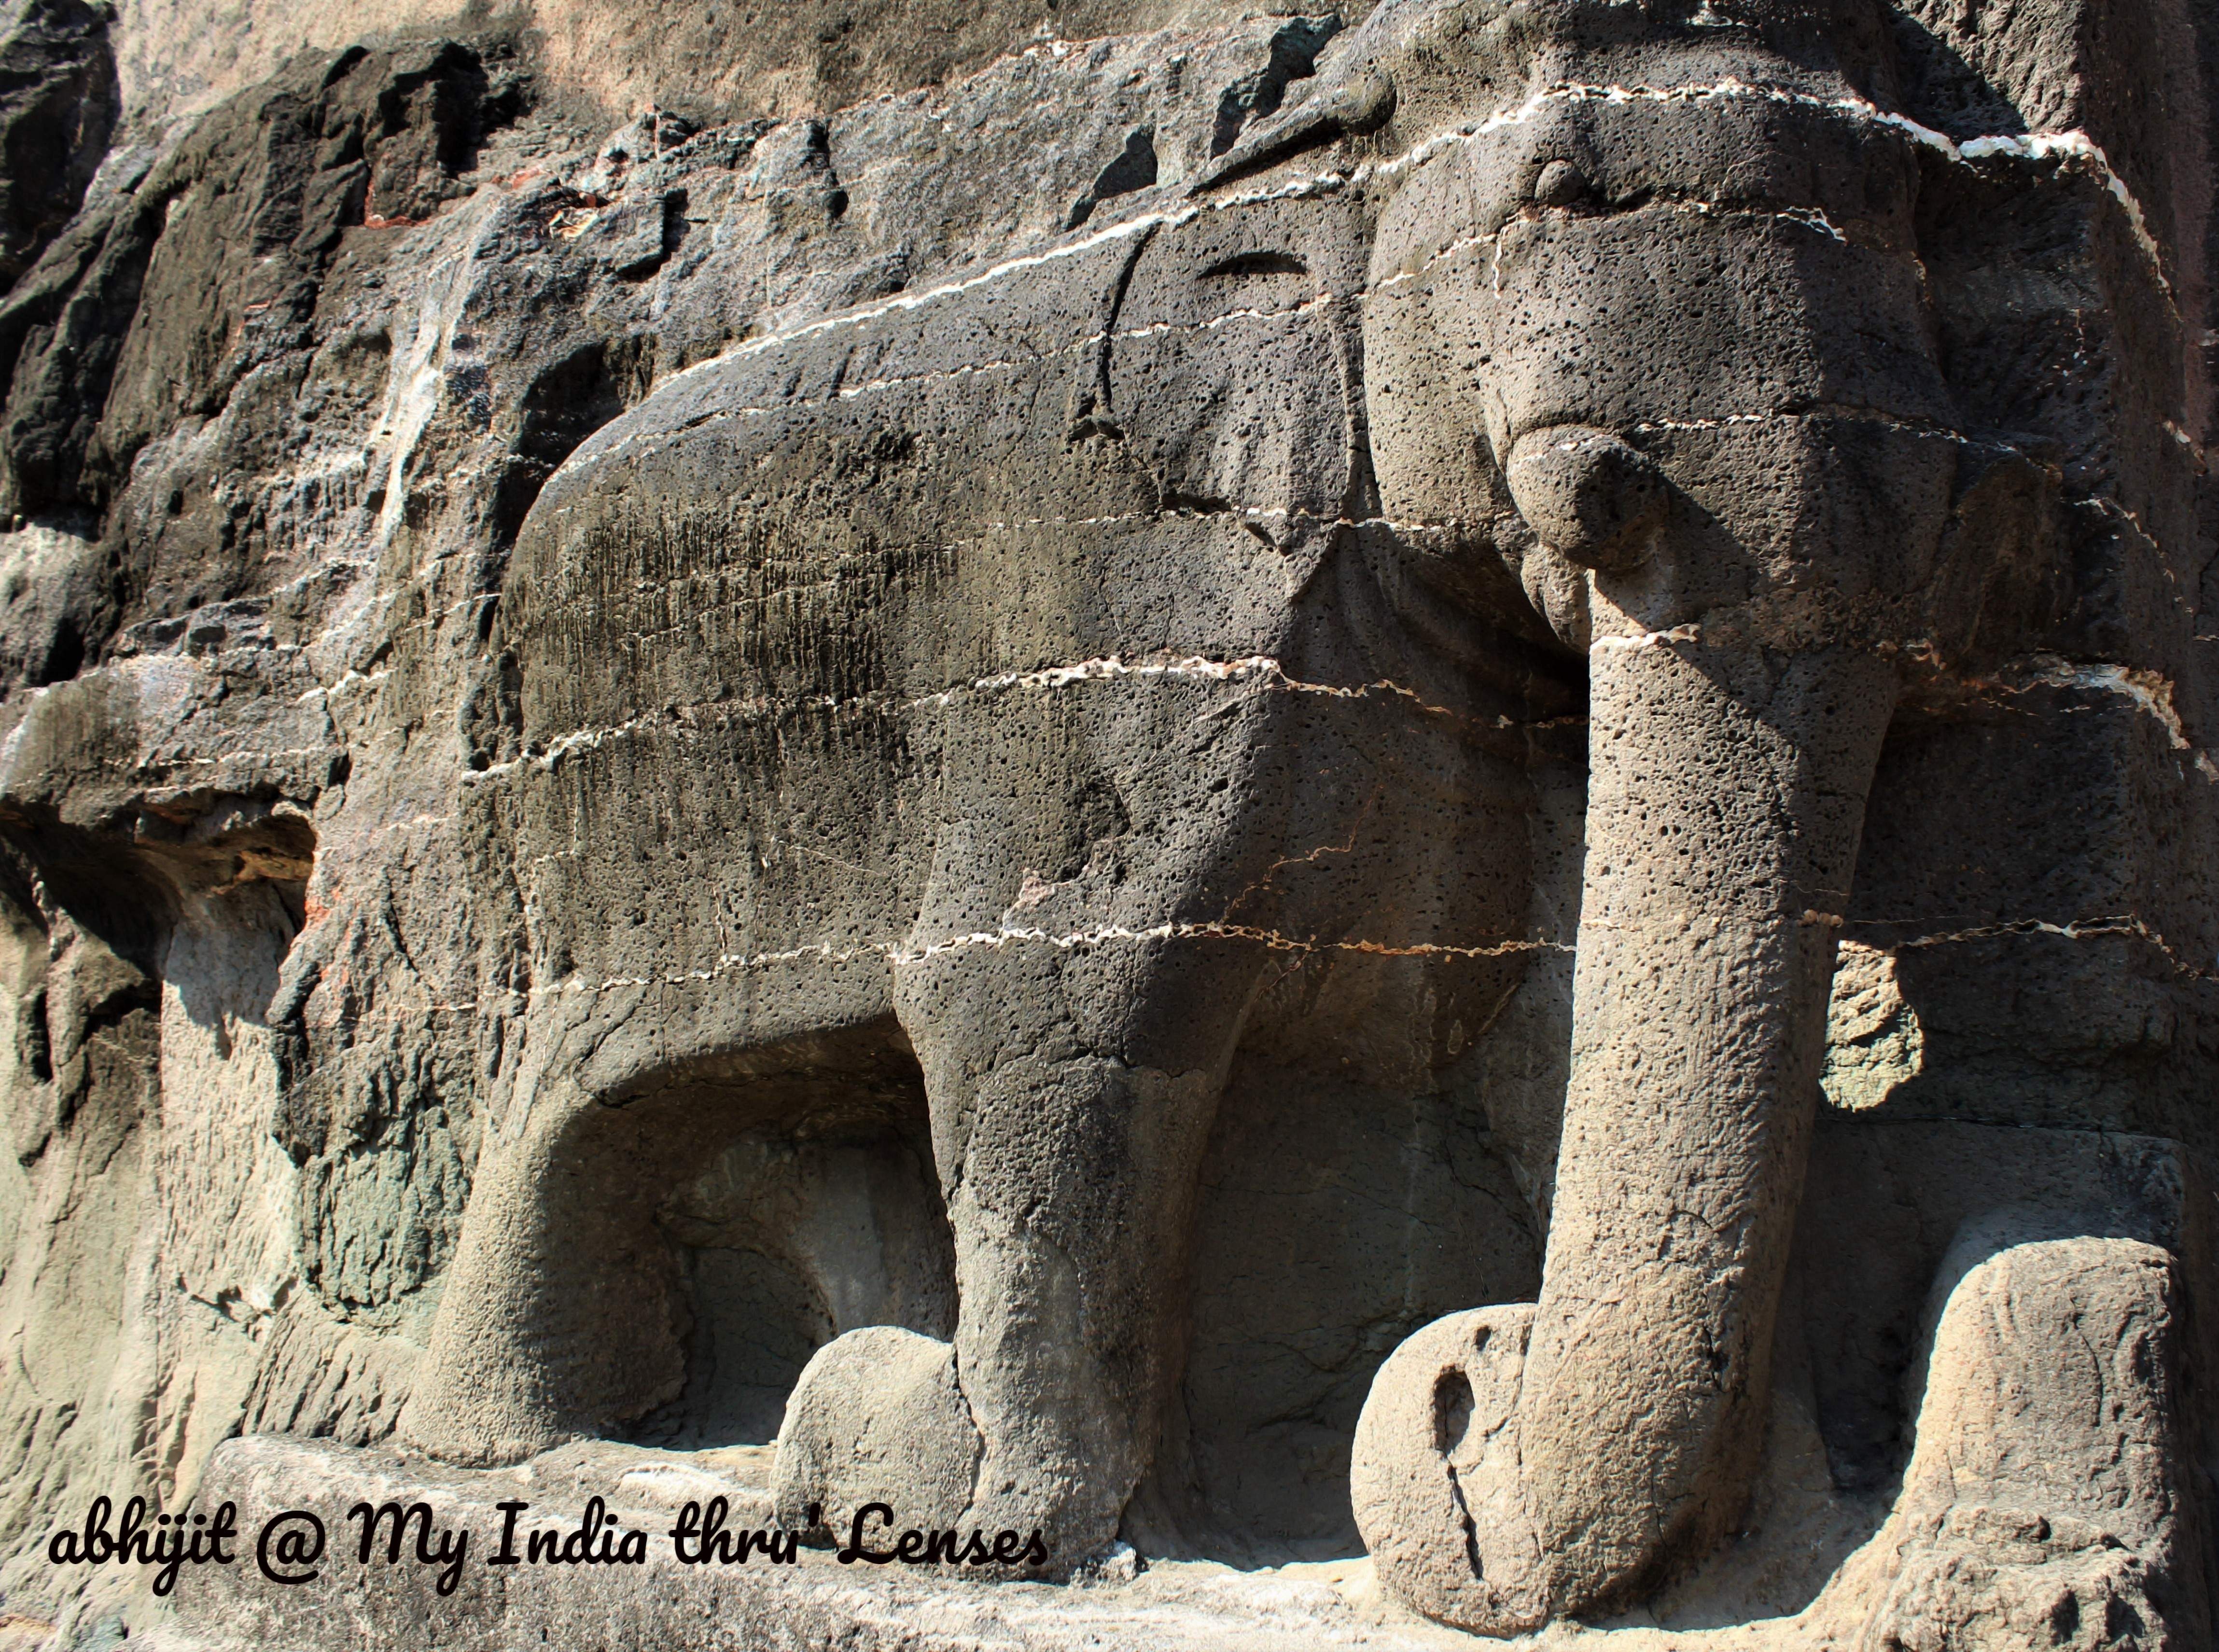 The Elephant - A famous sculpture on the outside walls of Cave 16